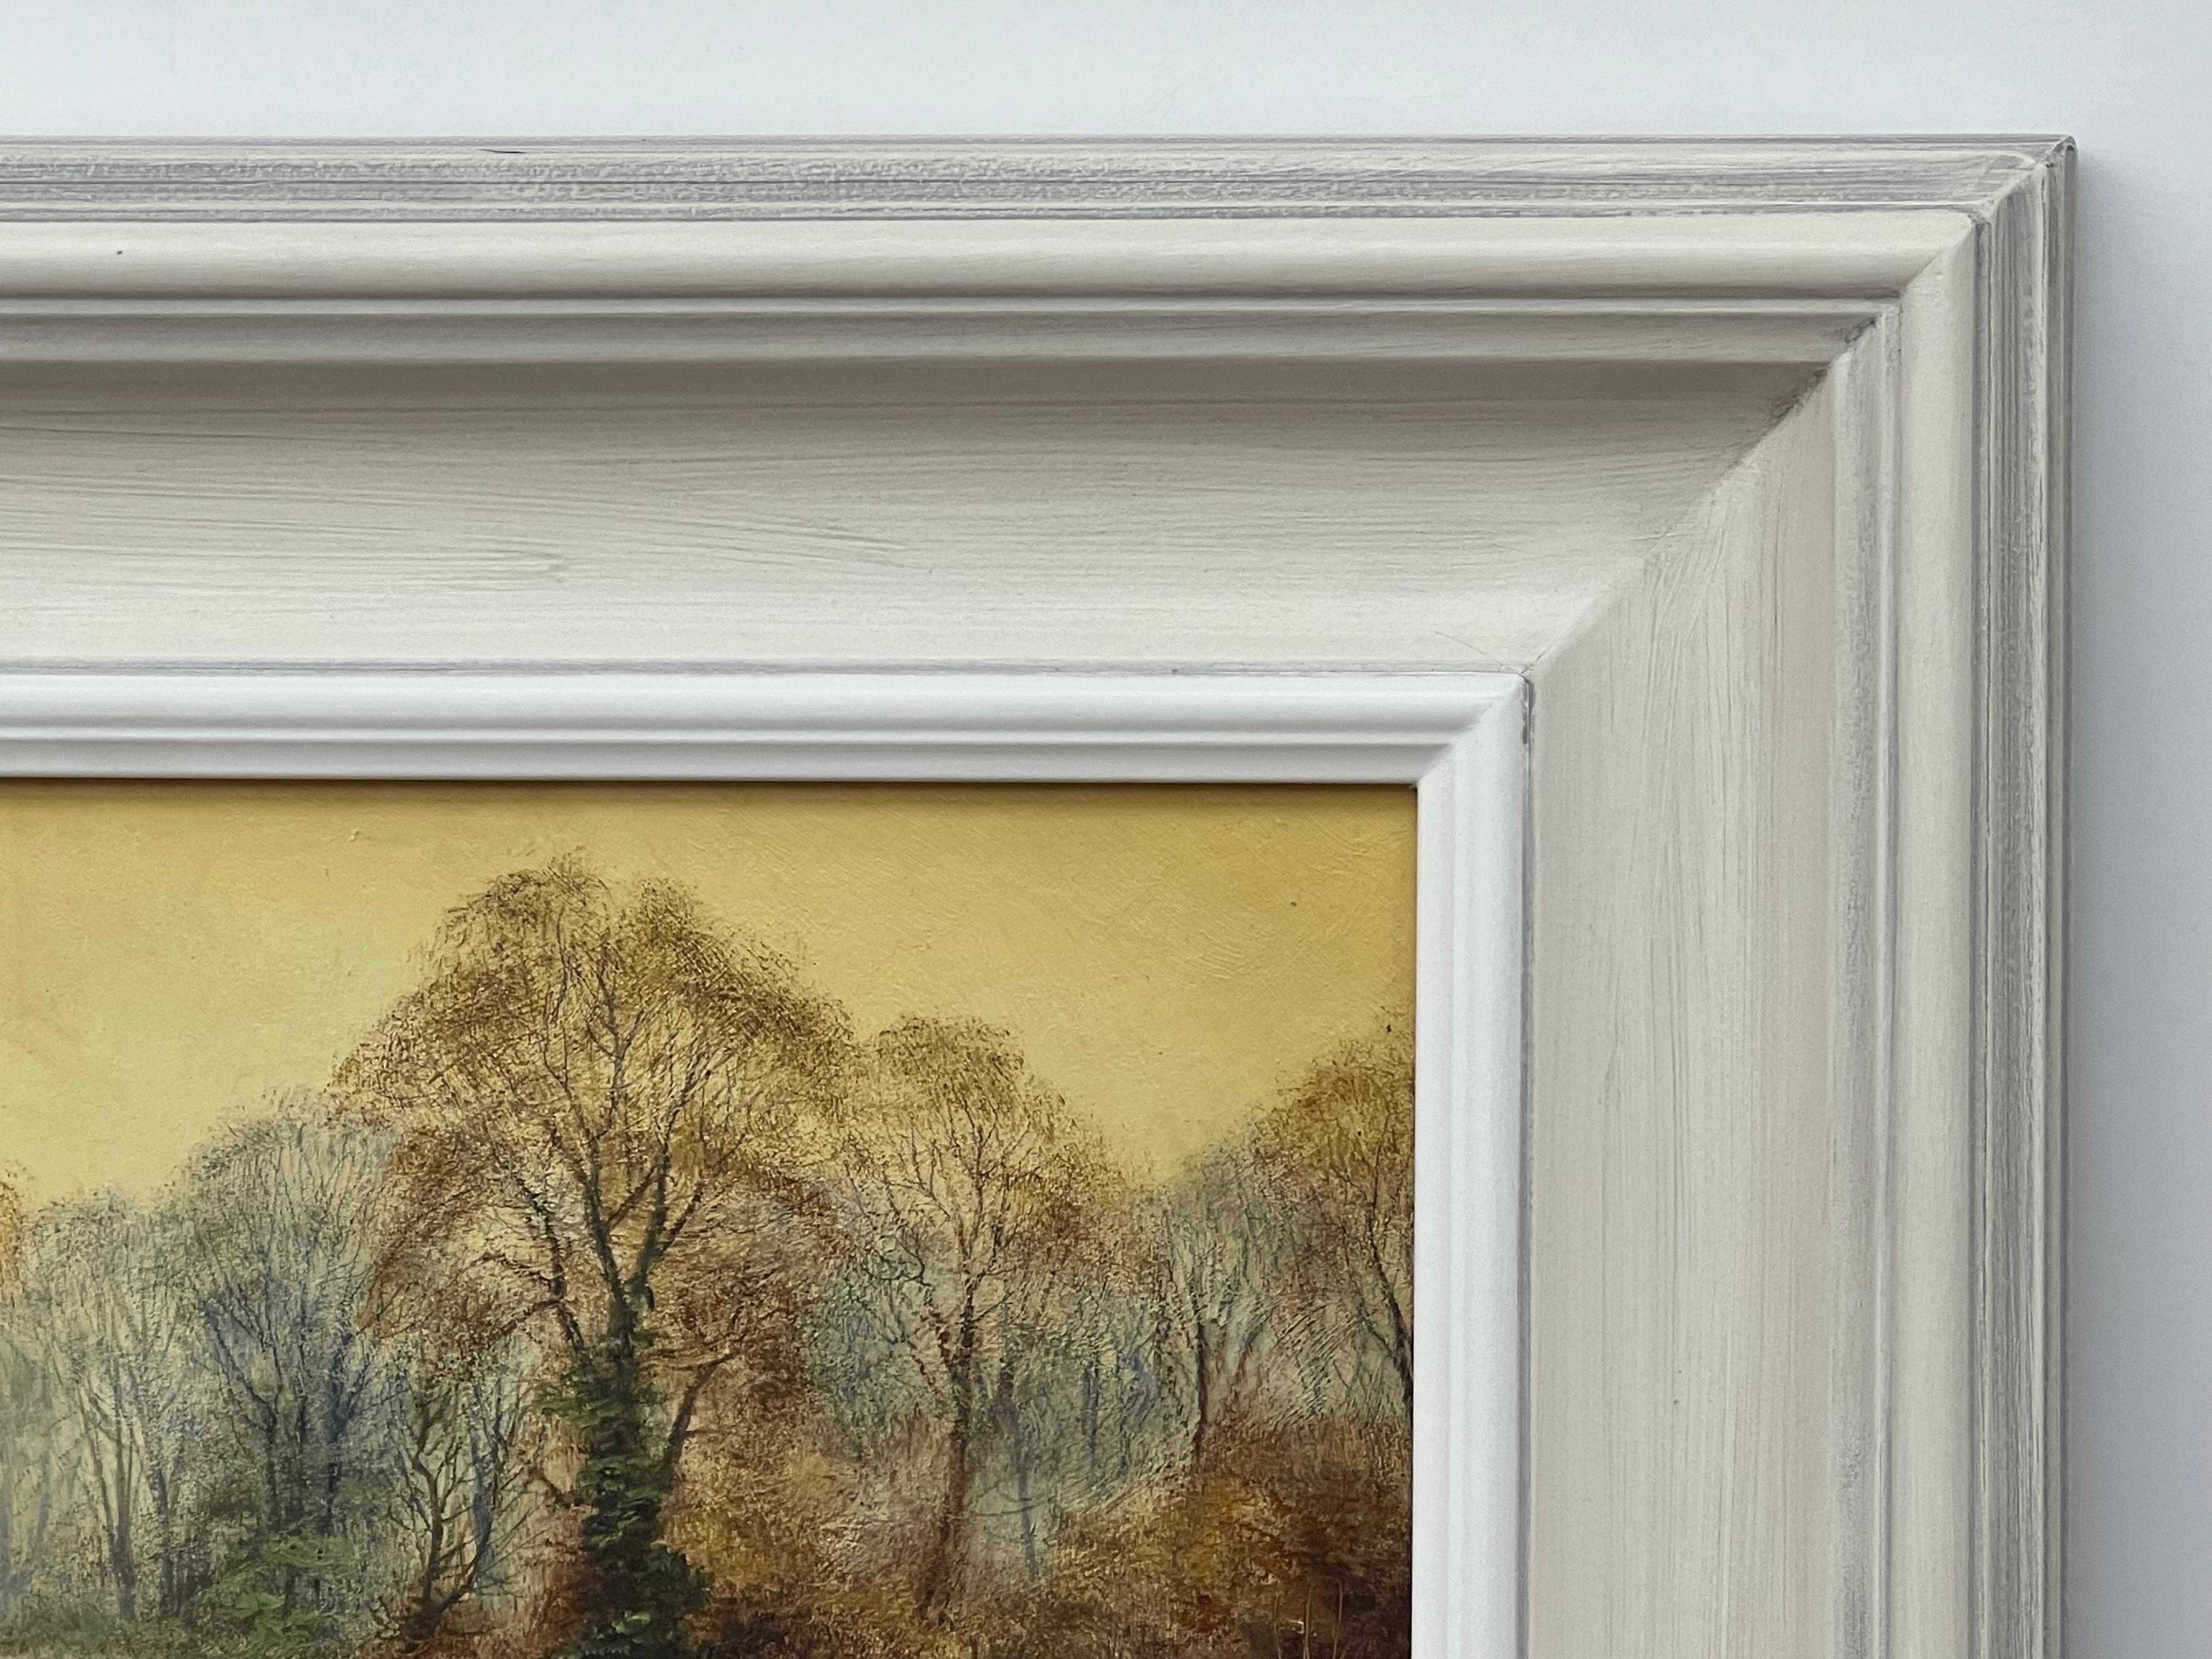 Reflections on Forest Pond in the English Countryside with Warm Yellows & Browns For Sale 3